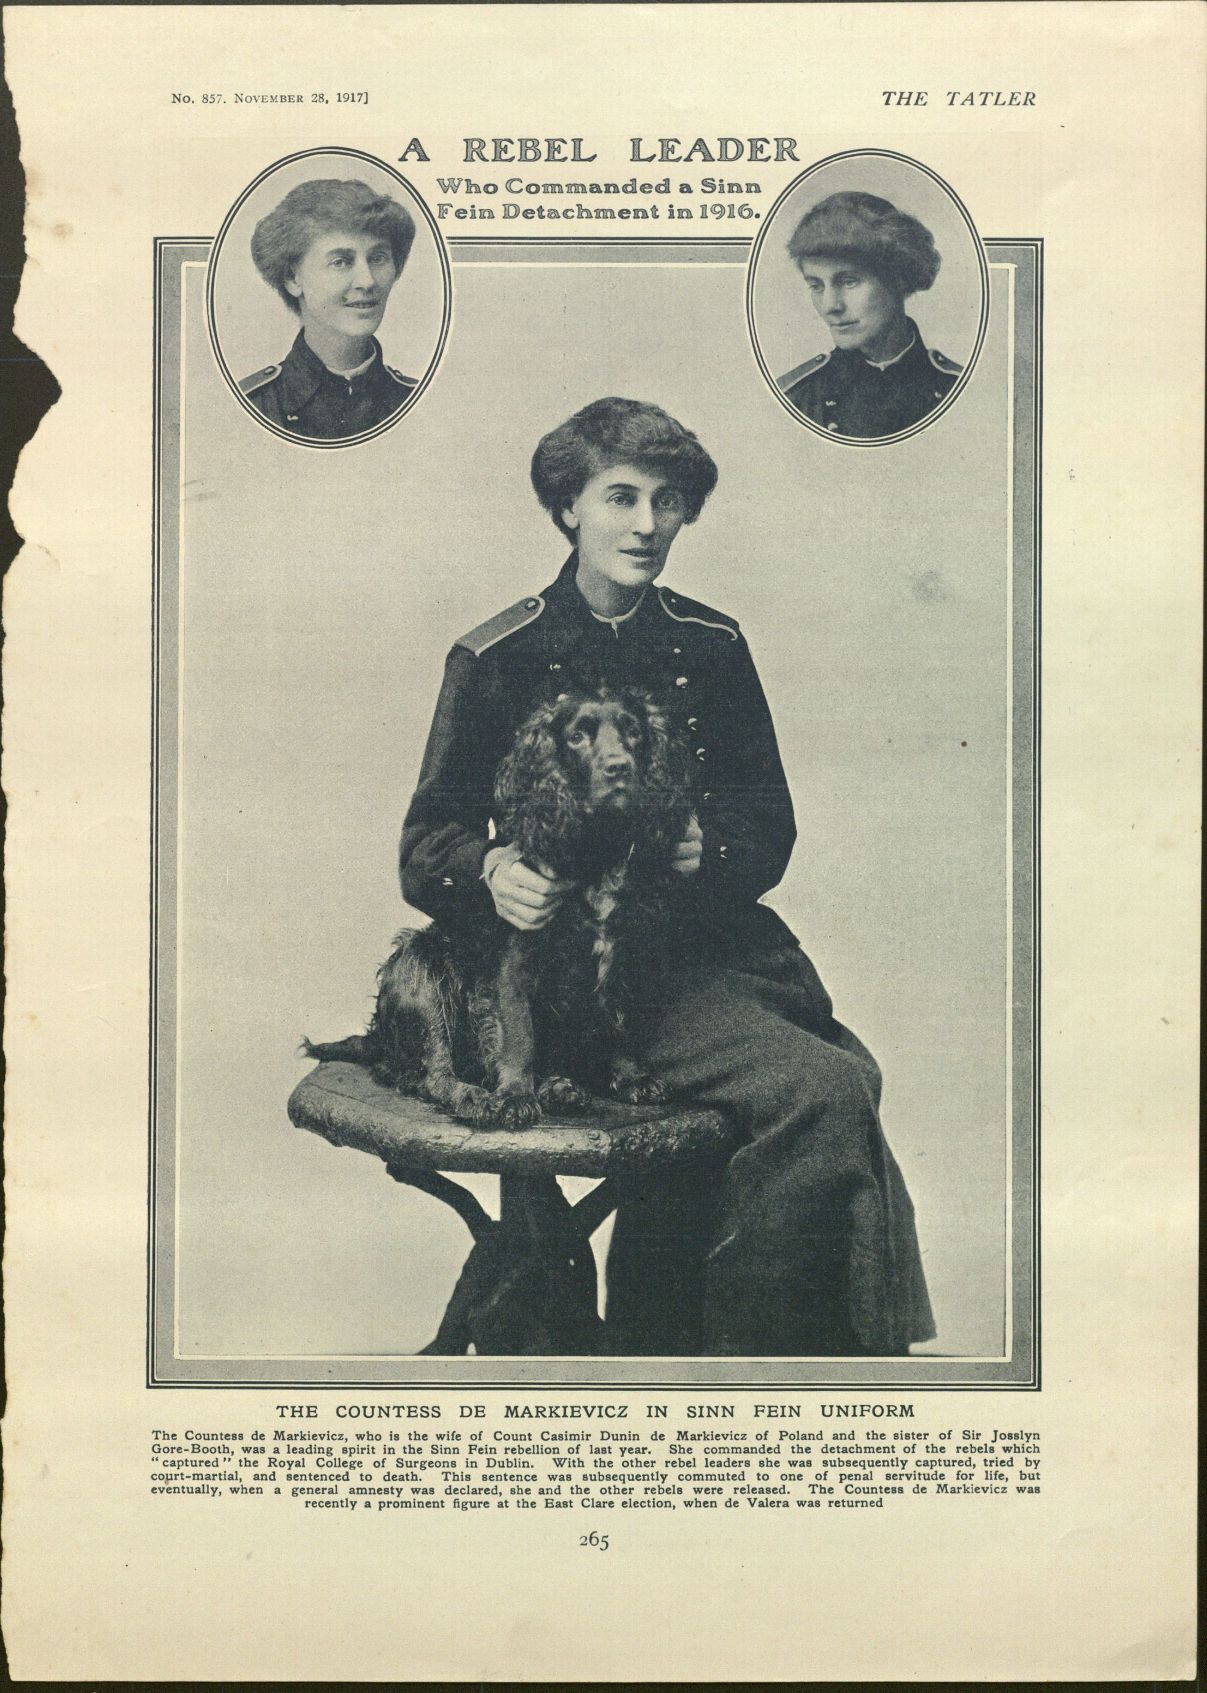 Image of Constance Markievicz excized from the Tatler, Nov. 28, 1917.